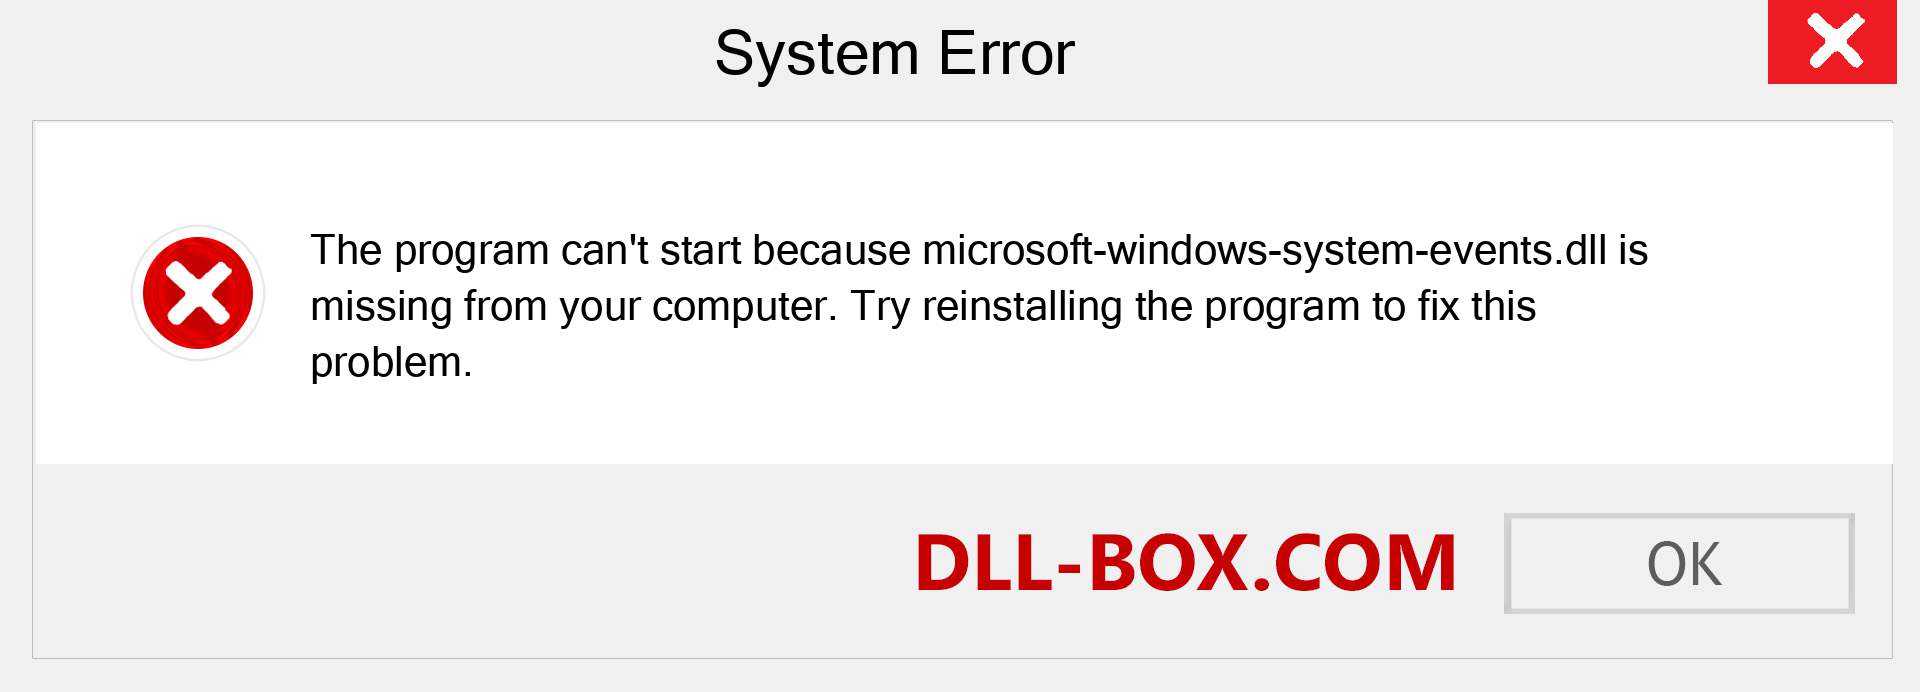  microsoft-windows-system-events.dll file is missing?. Download for Windows 7, 8, 10 - Fix  microsoft-windows-system-events dll Missing Error on Windows, photos, images